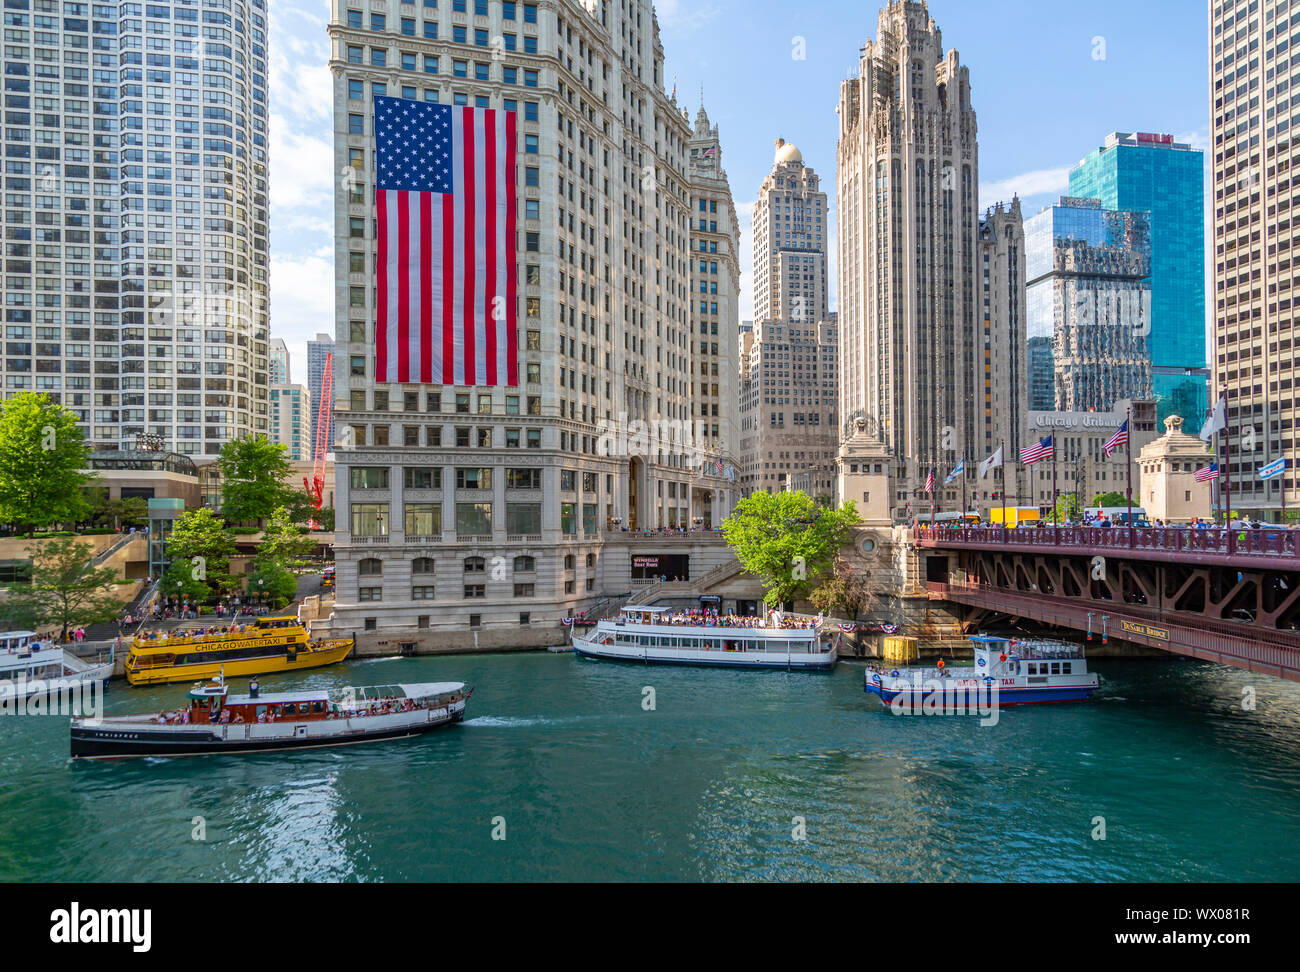 View of American flag on the Wrigley Building and Chicago River, Chicago, Illinois, United States of America, North America Stock Photo